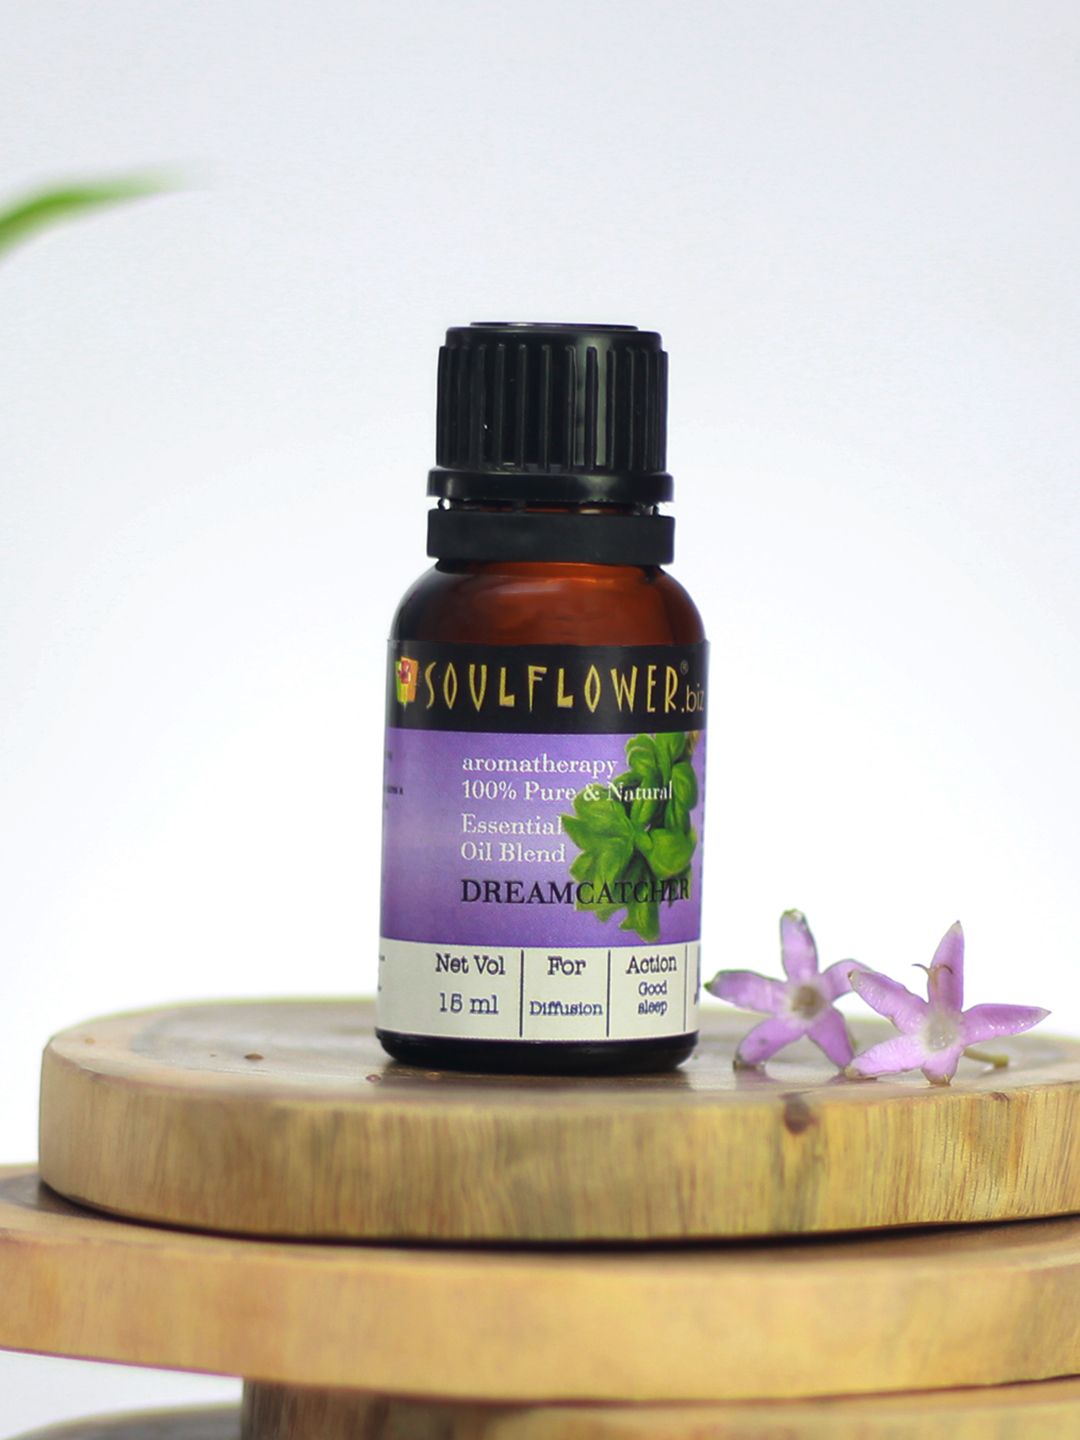 Soulflower Dreamcatcher Essential Oil Blend Price in India